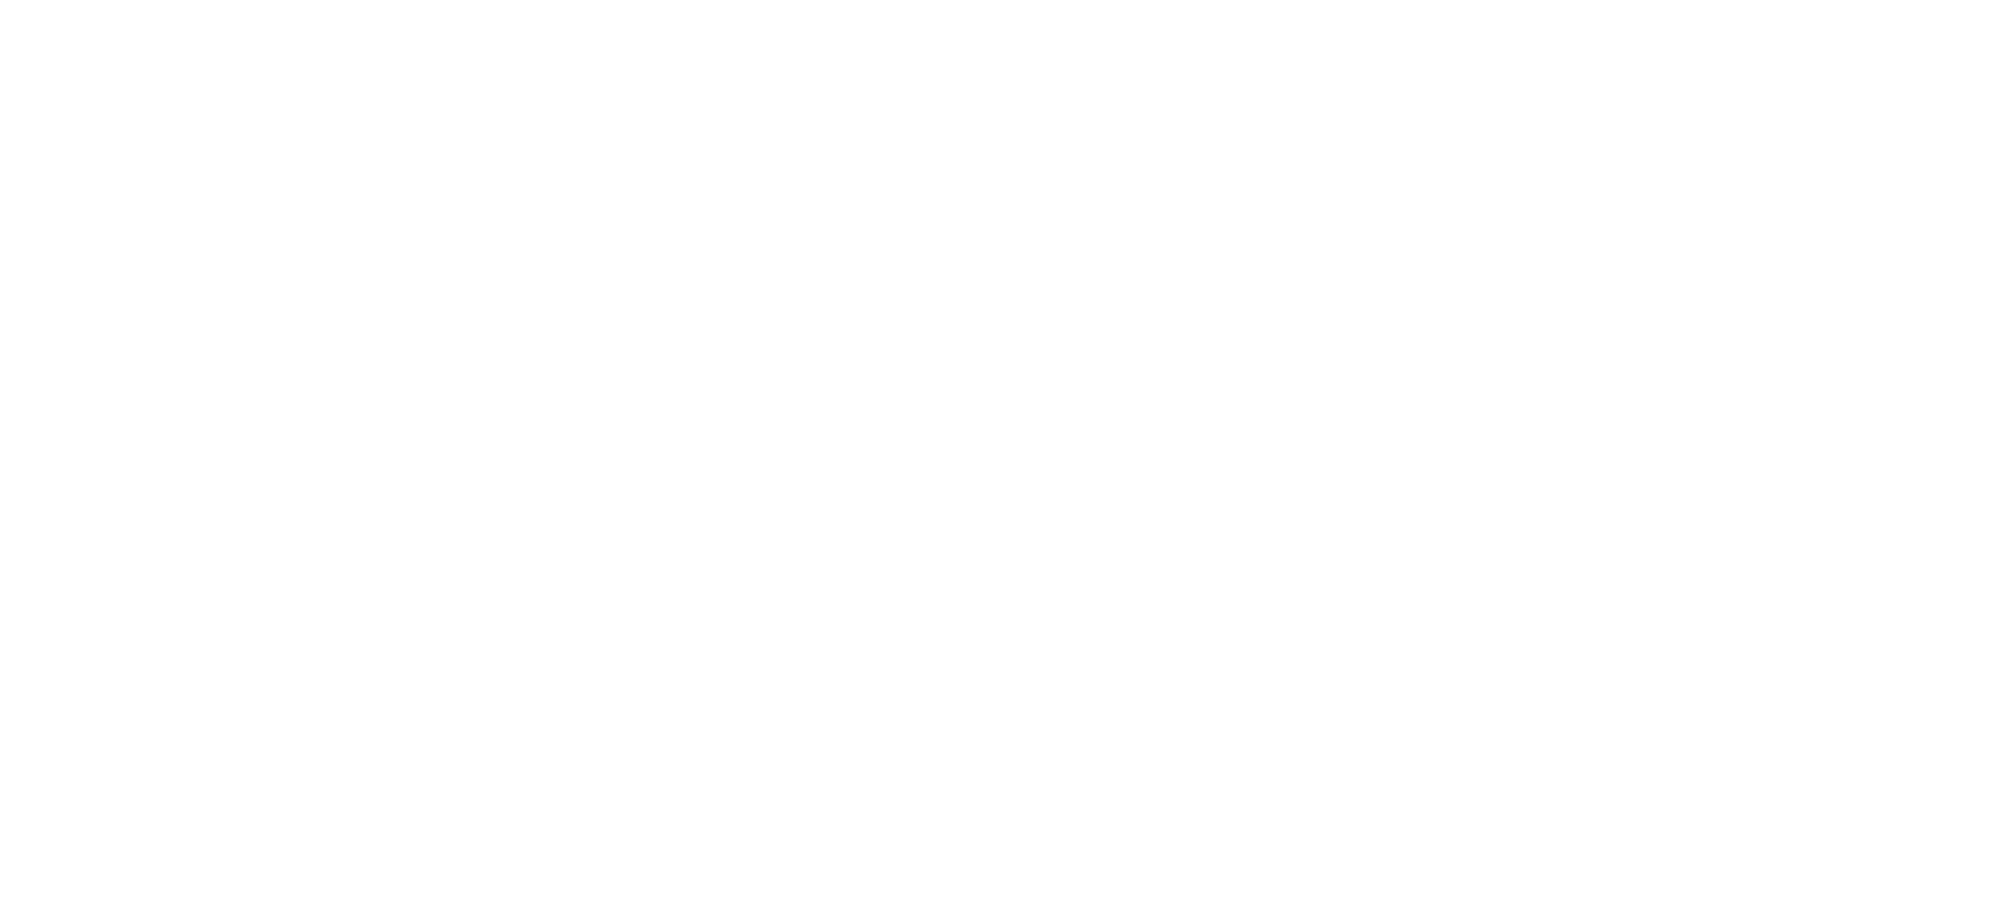 A Power Roofing